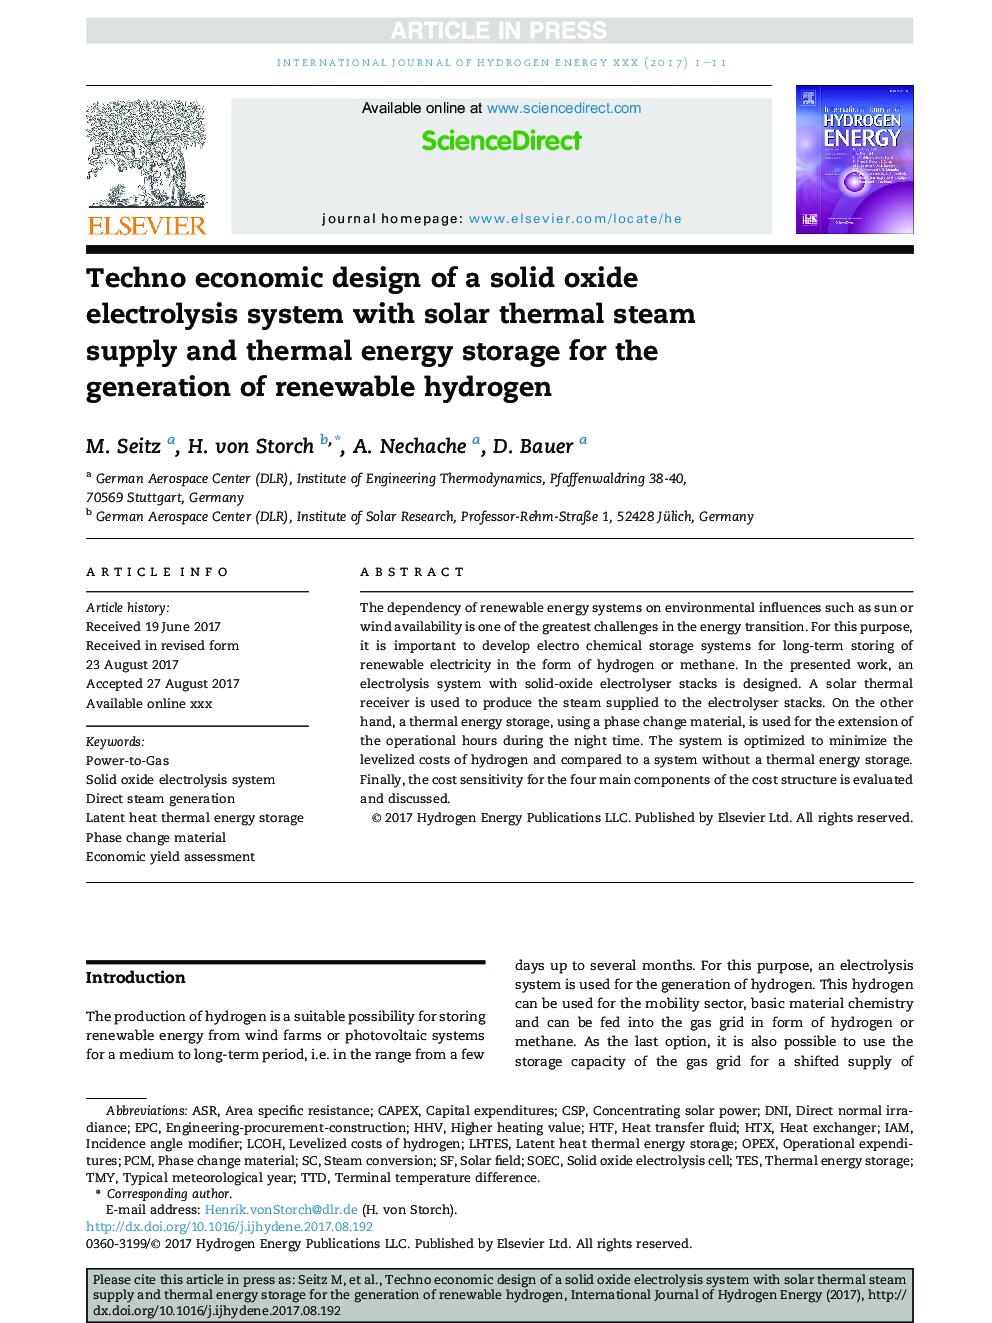 Techno economic design of a solid oxide electrolysis system with solar thermal steam supply and thermal energy storage for the generation of renewable hydrogen